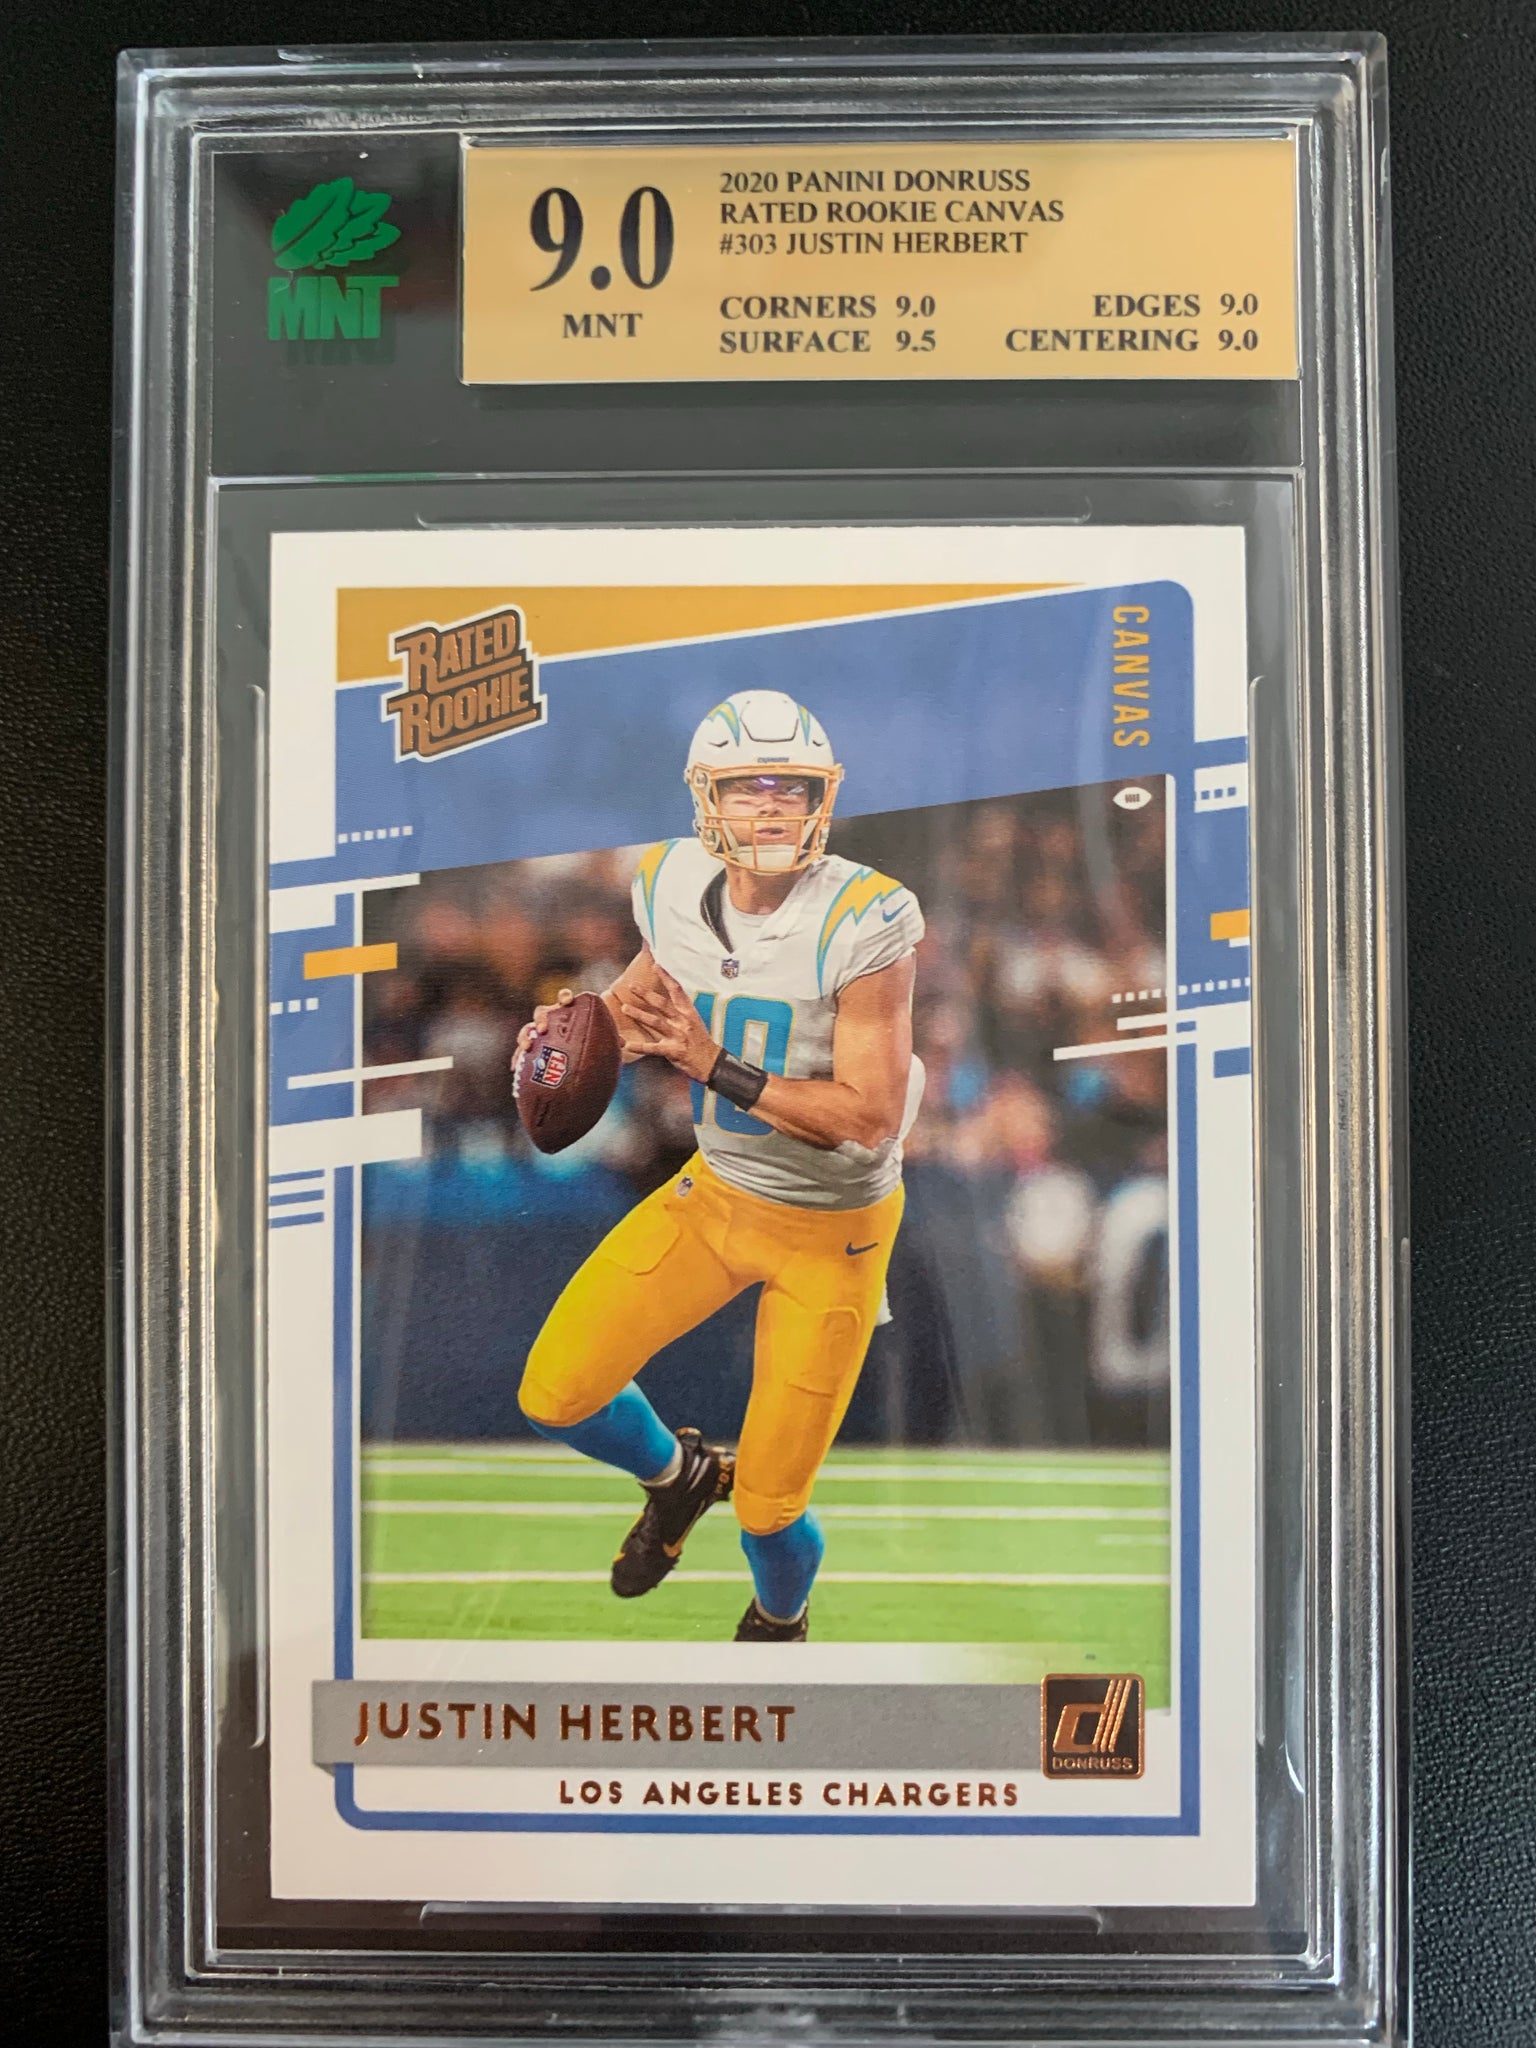 2020 PANINI DONRUSS FOOTBALL #303 LOS ANGELES CHARGERS - JUSTIN HERBERT SP CANVAS RATED ROOKIE CARD GRADED MNT 9.0 MINT